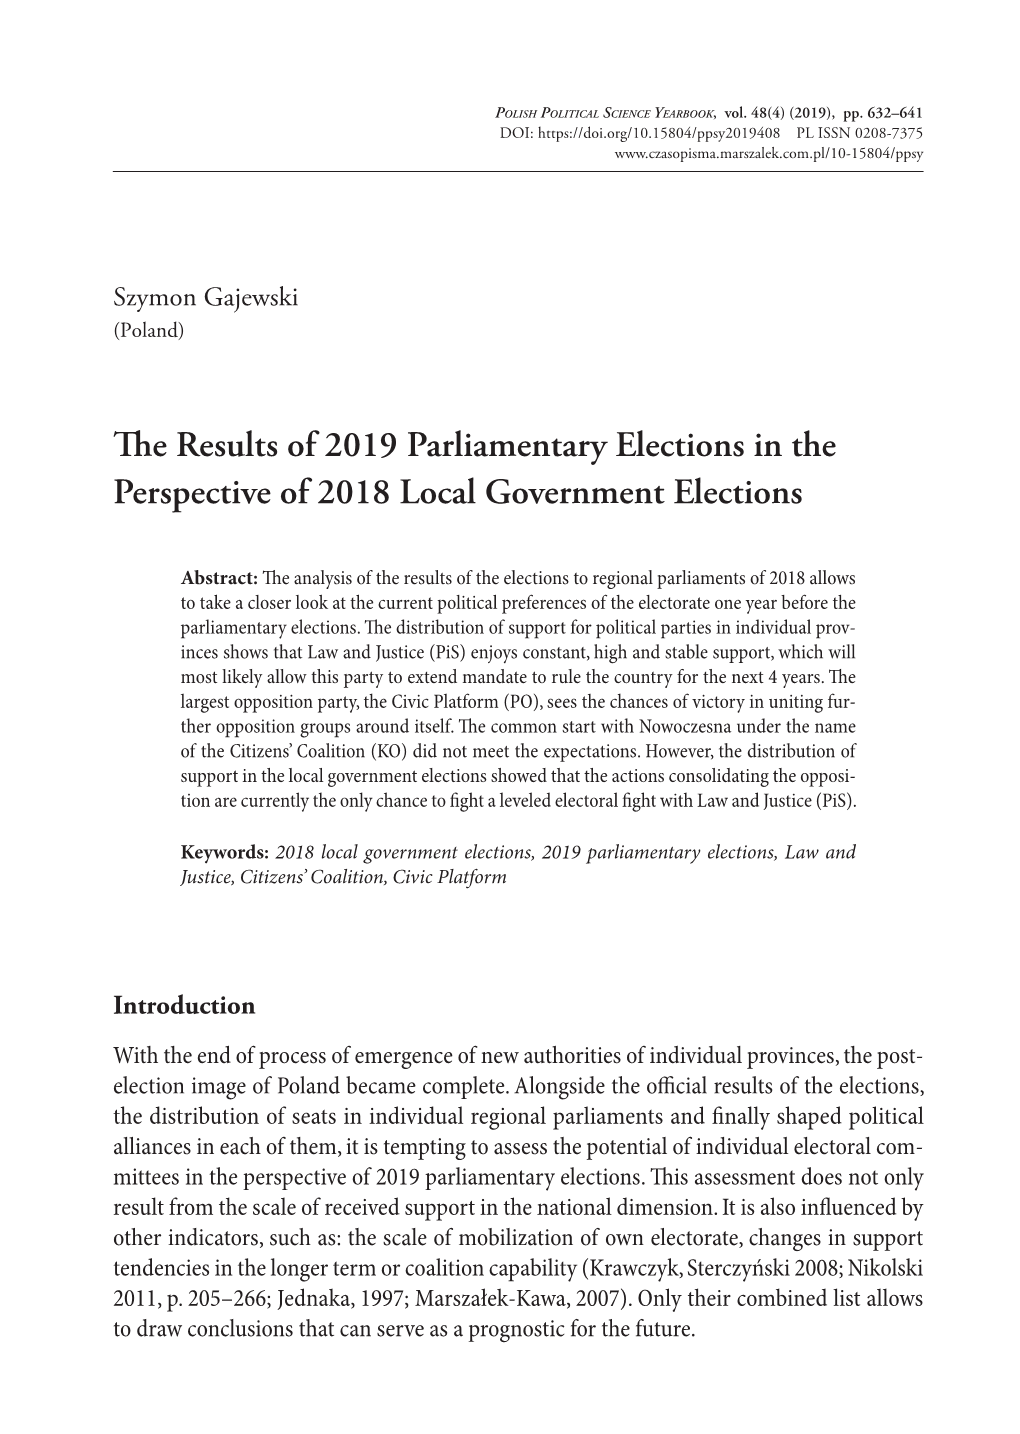 The Results of 2019 Parliamentary Elections in the Perspective of 2018 Local Government Elections